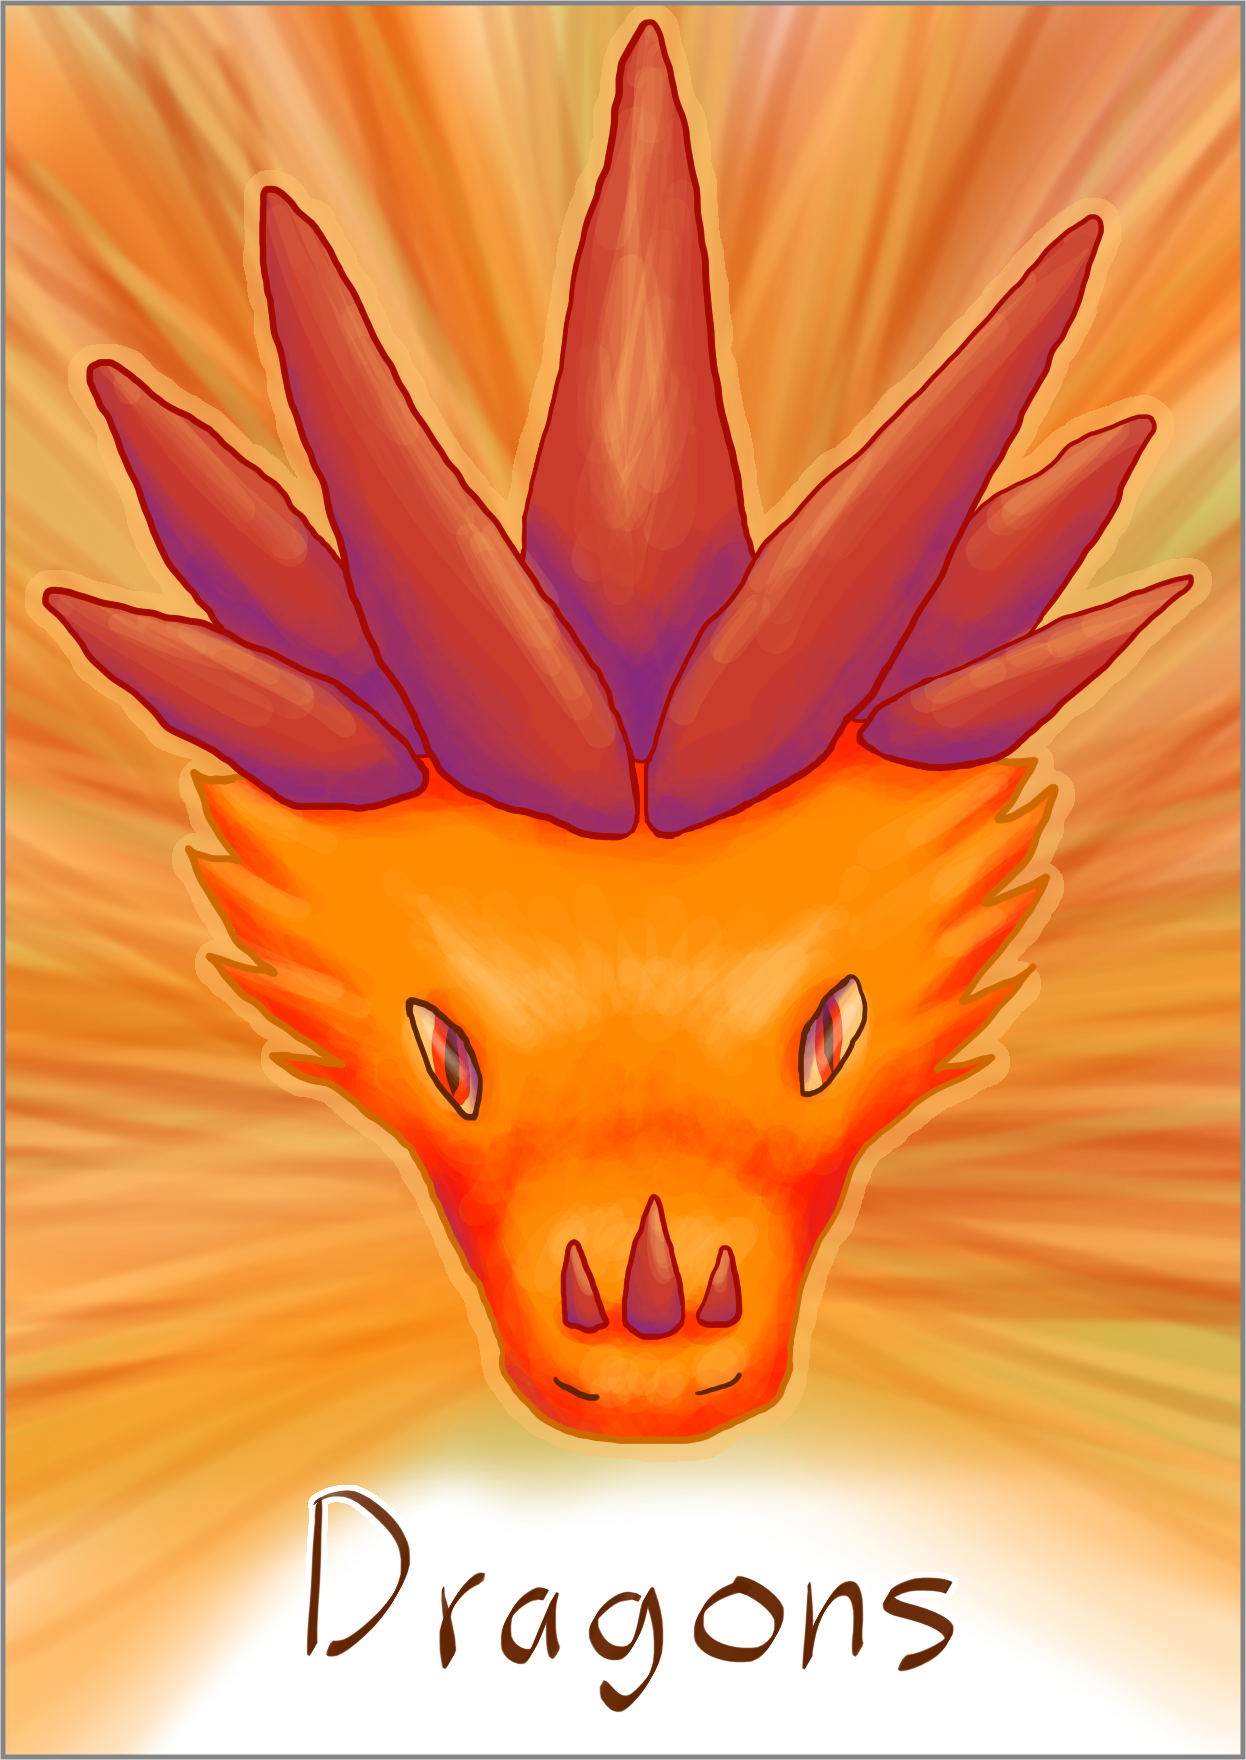 'Dragons' face of a red dragon, full colour